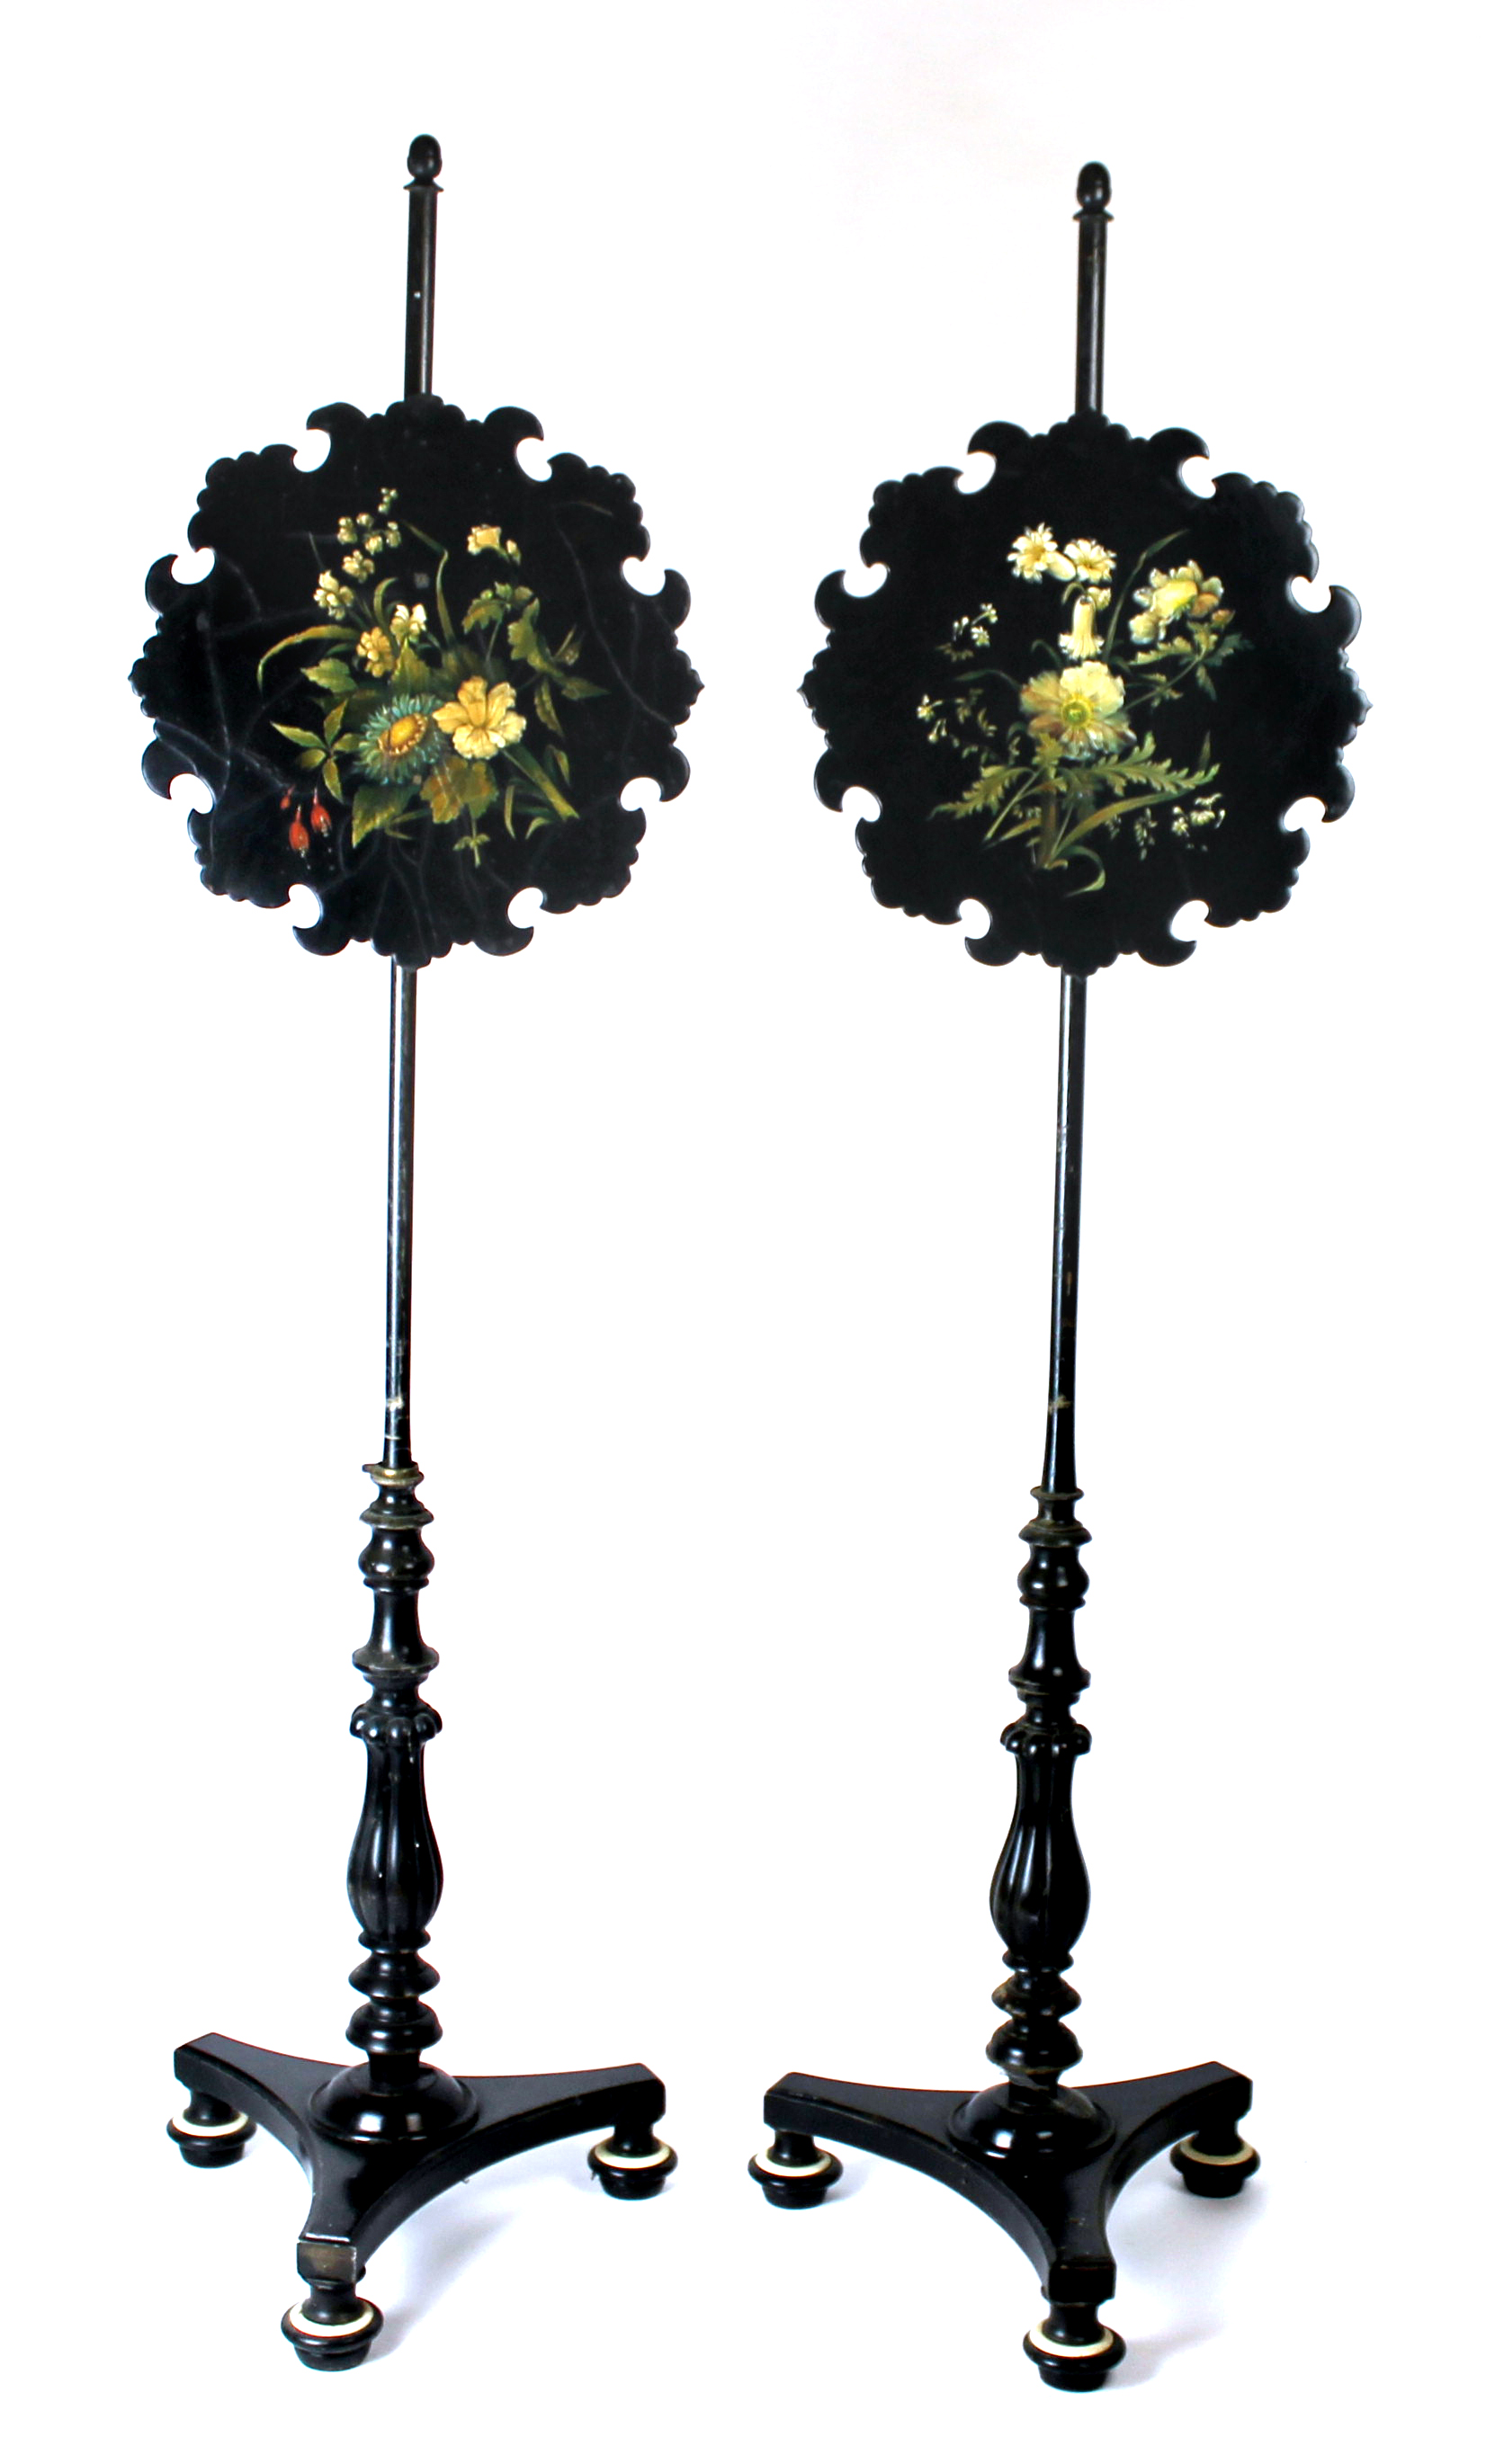 A pair of early 19th century ebonised pole screens, with floral painted lacquer panels on triform